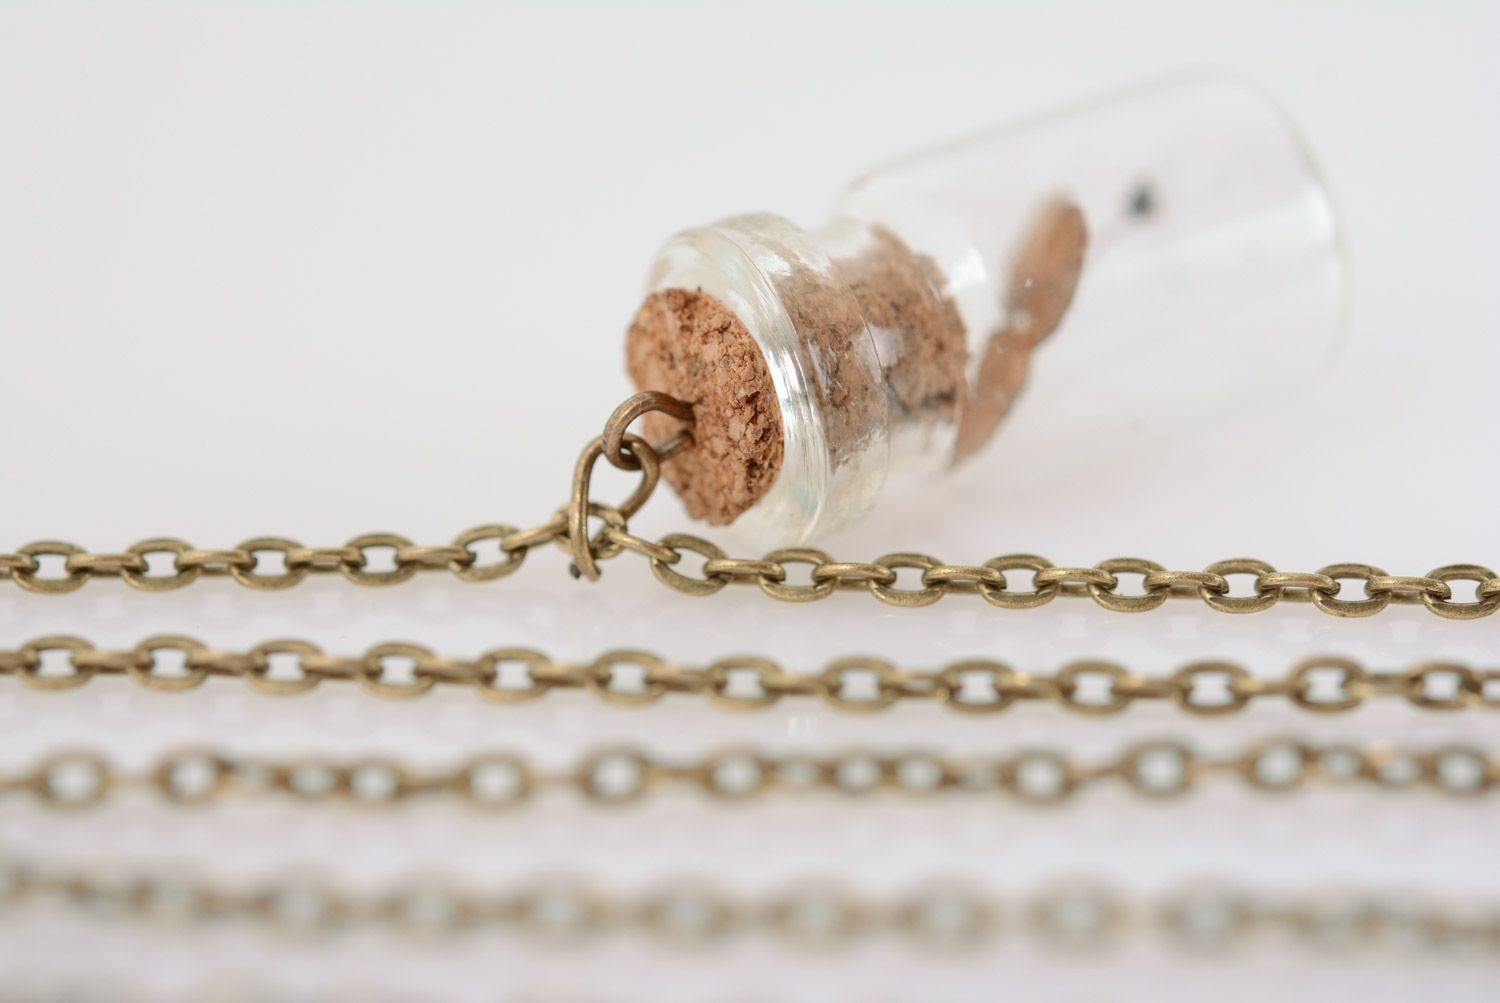 Small handmade glass vial with cork pendant with plant inside on metal chain photo 5